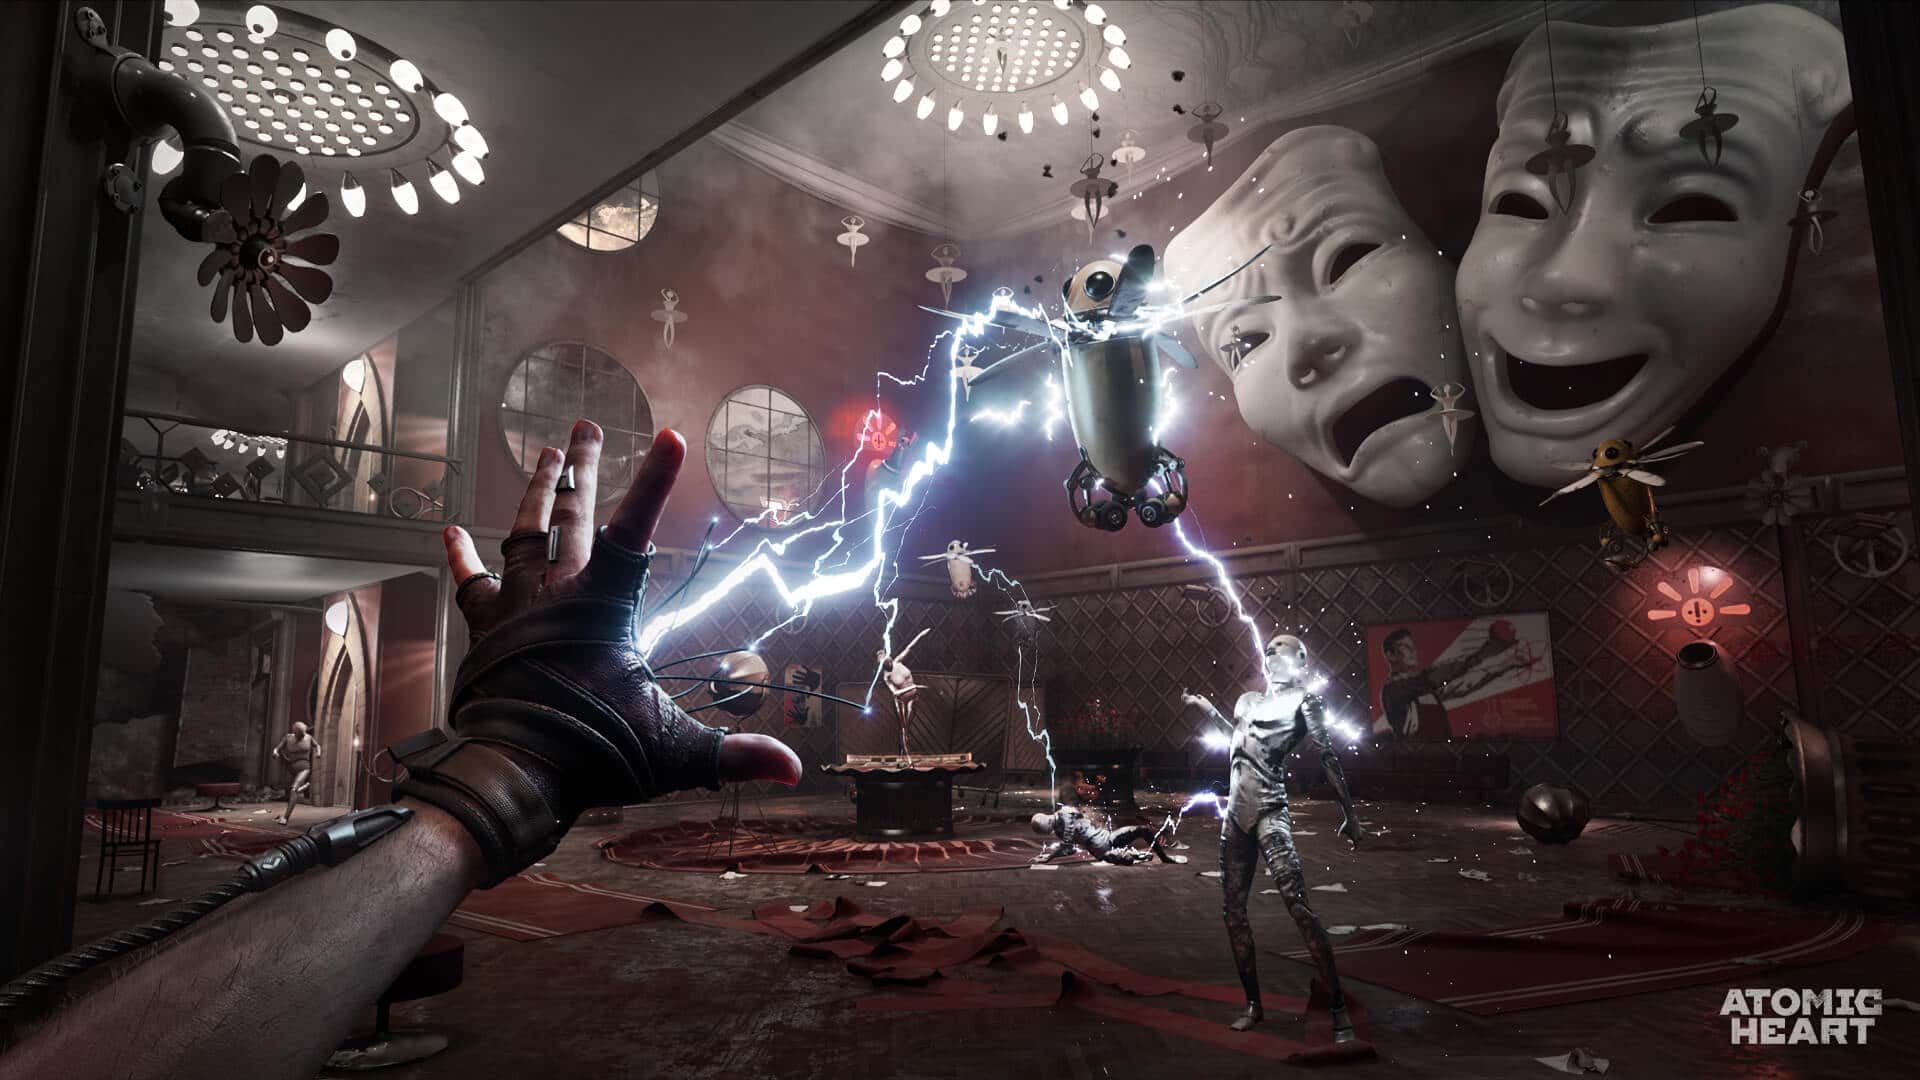 The player uses their "Shok" powers to zap a Pchela, and Lab Tech in the theater via Atomic Heart (2023), Focus Entertainment